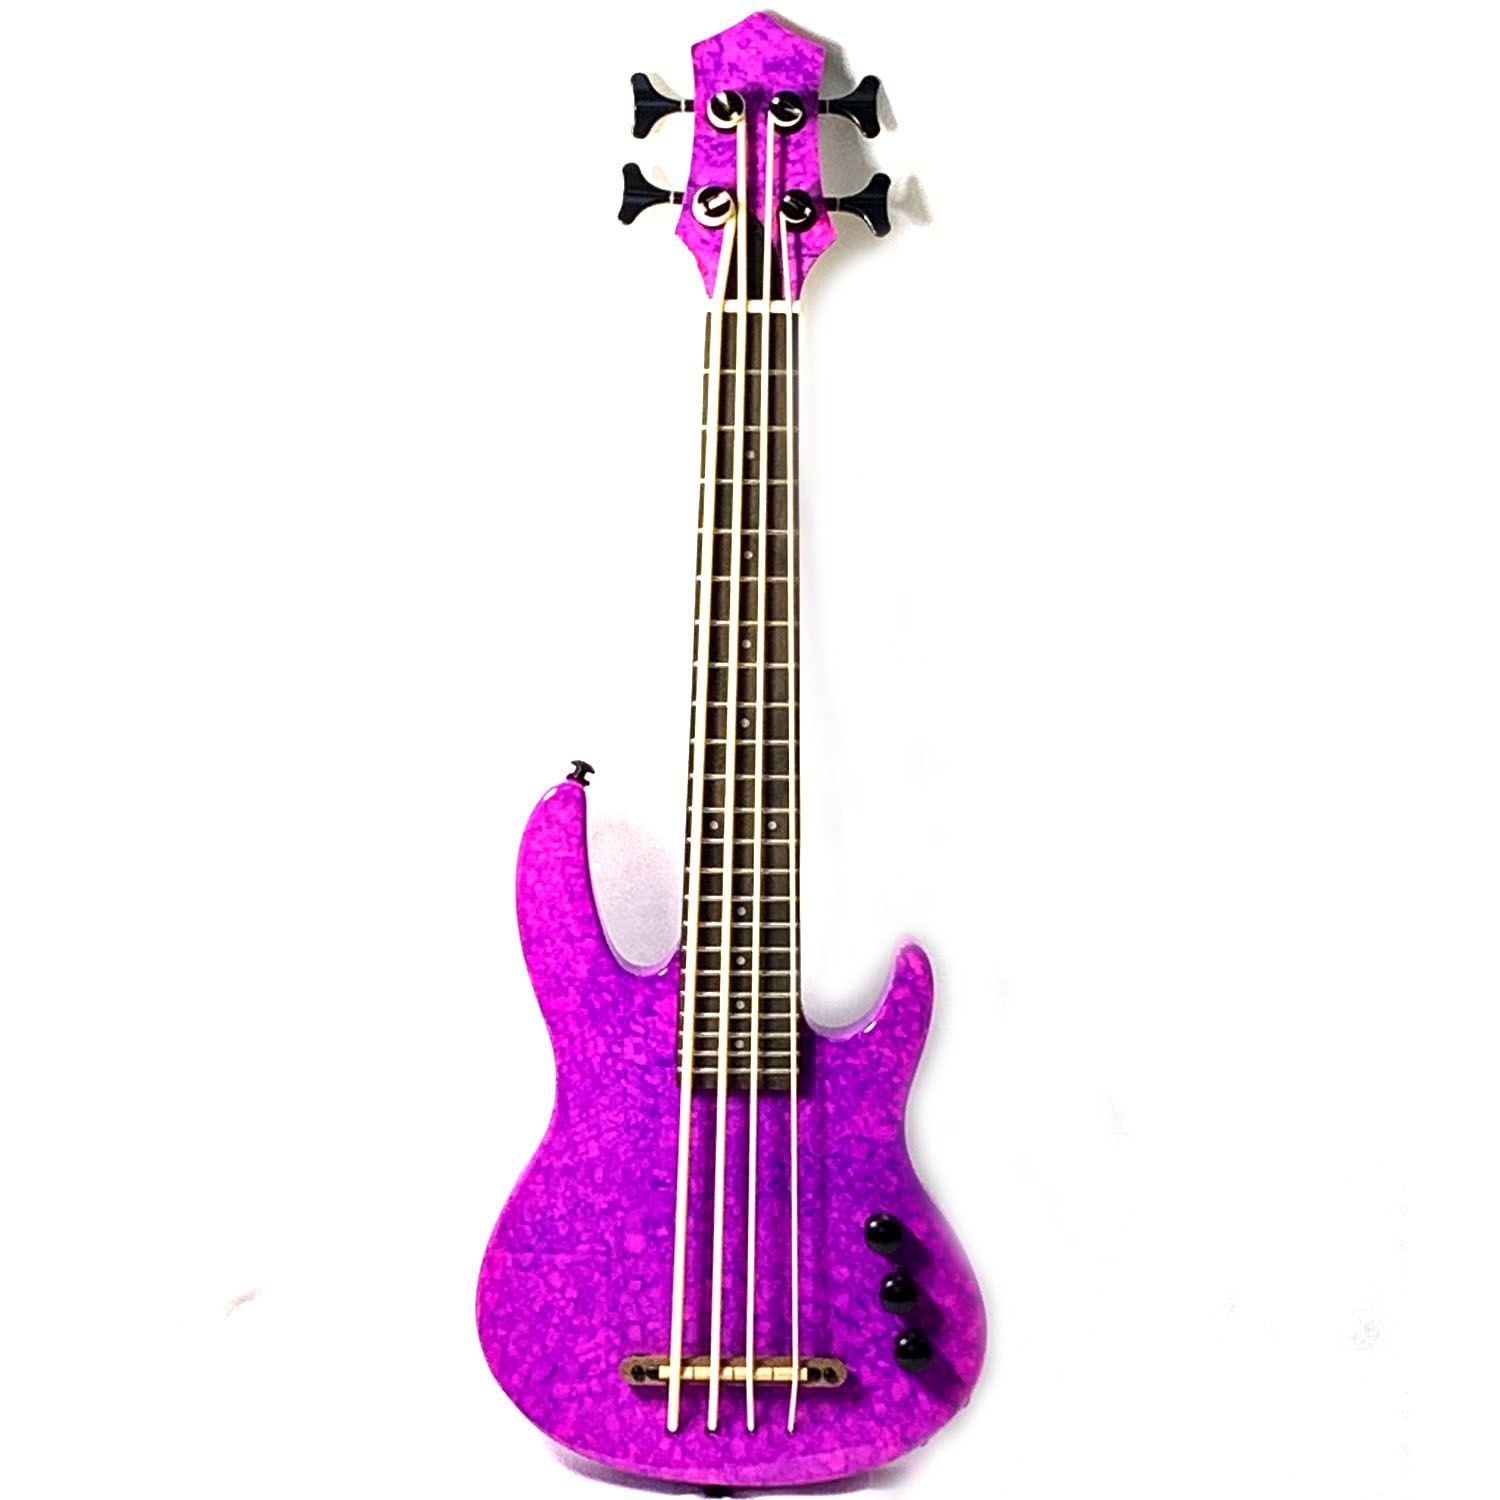 MiNi 4string ukulele electric bass with black color 